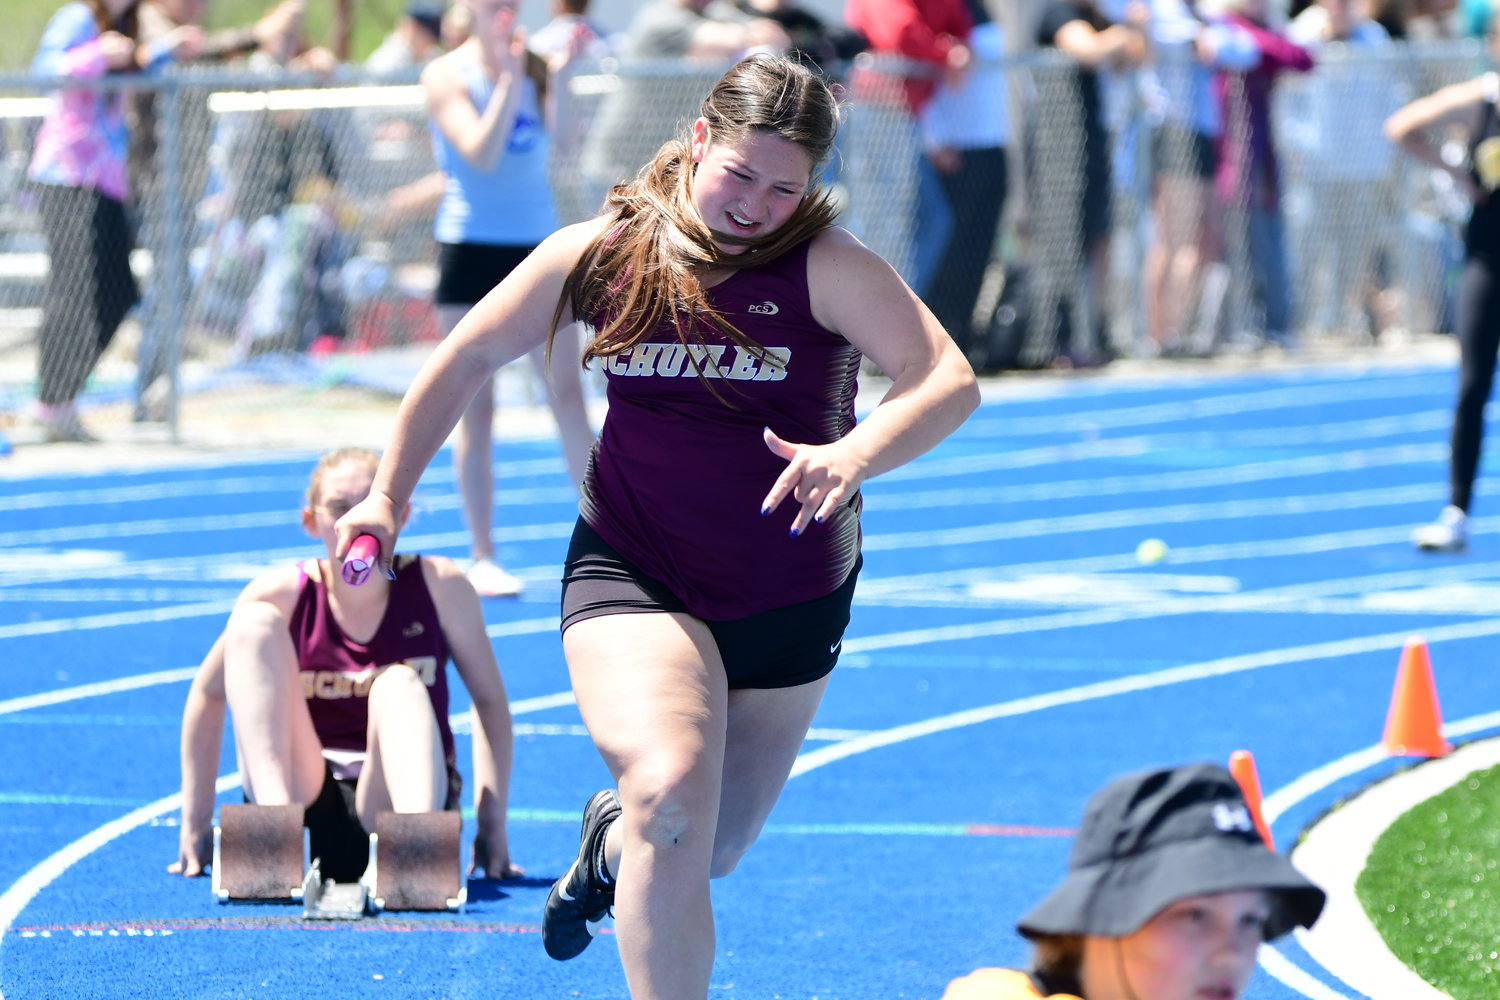 Photos from the Class 2 District 3 track meet, held May 7, 2022, at Putnam County High School.